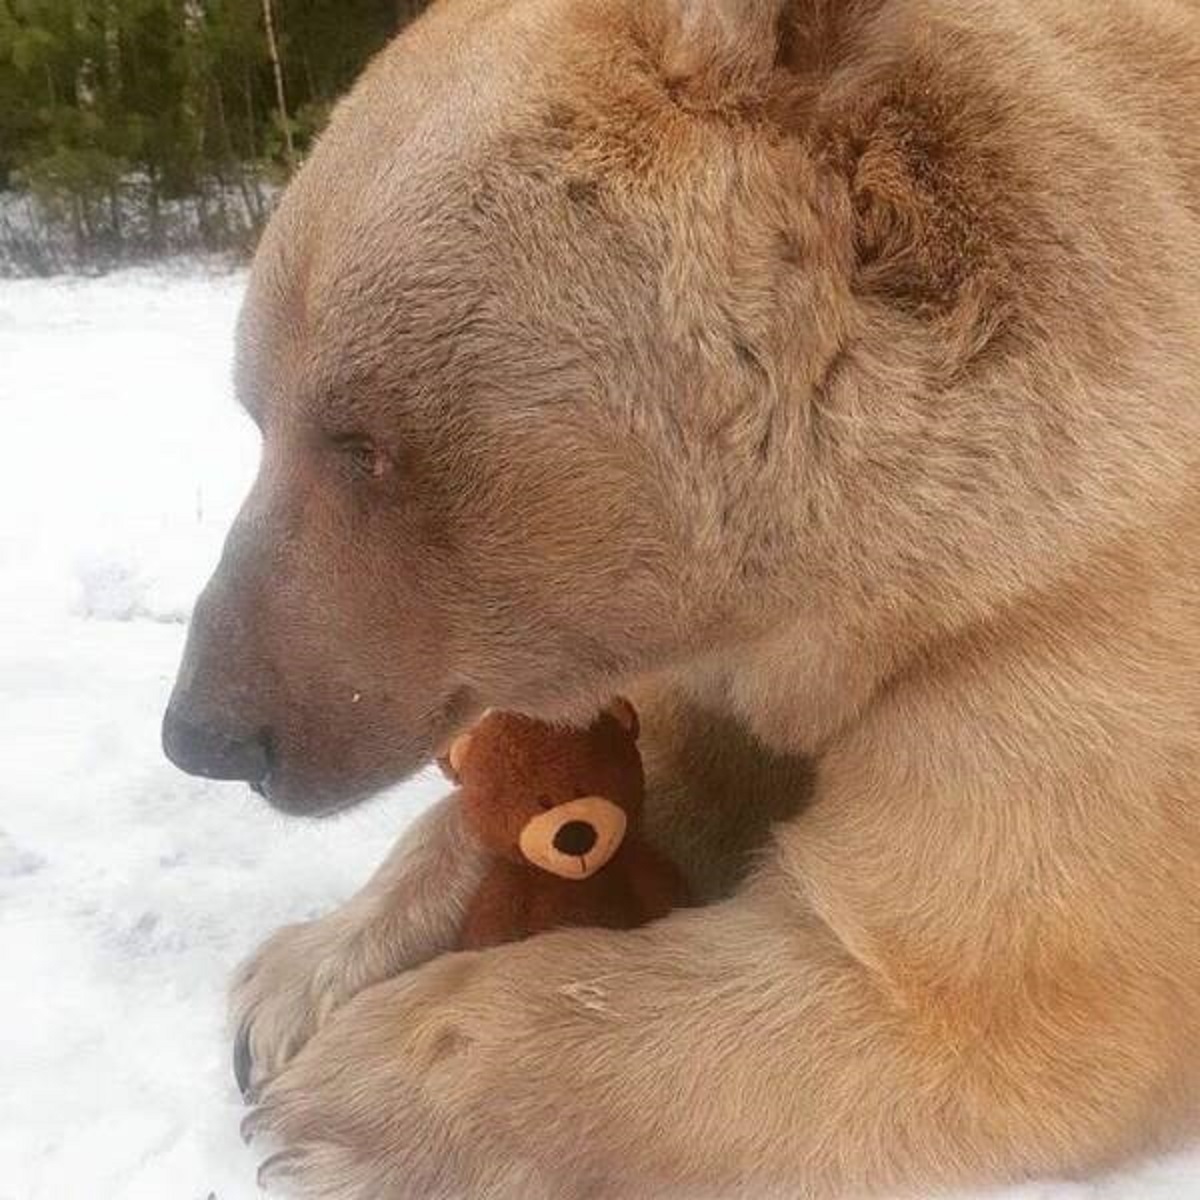 "This Mama Bear Lost Her Cub And They Gave Her This Stuffed Teddy As A Replacement To Make Her Feel Better"